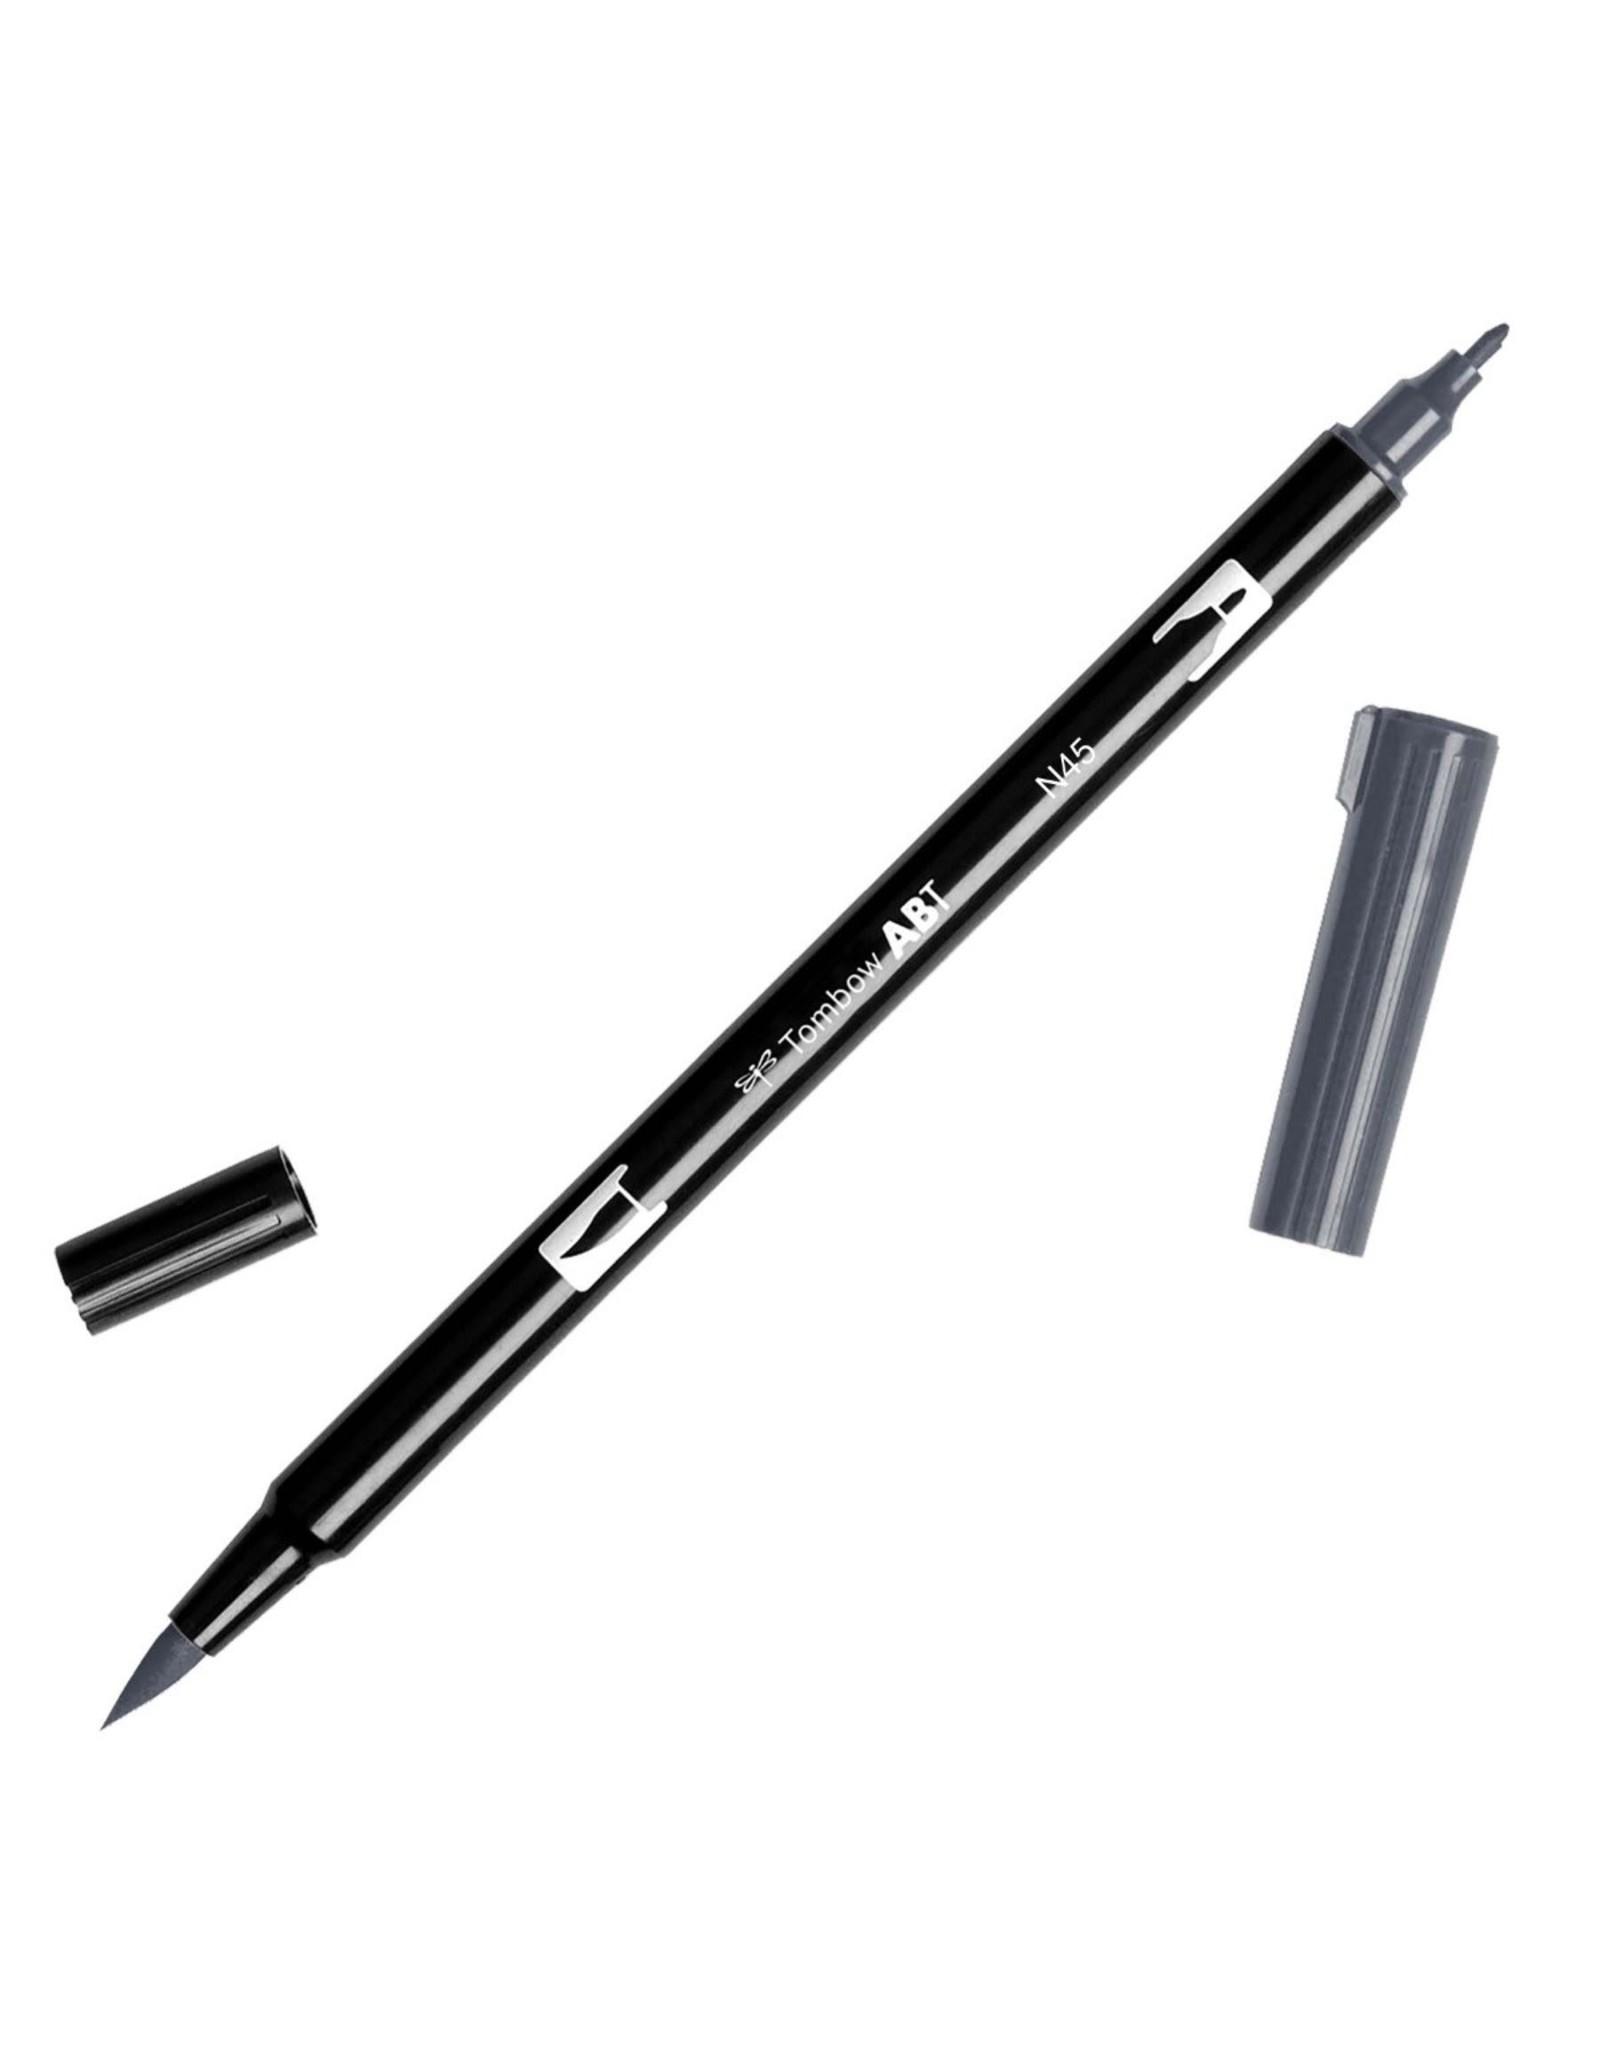 TOMBOW TOMBOW ABT-N45 COOL GRAY 10 DUAL BRUSH MARKER